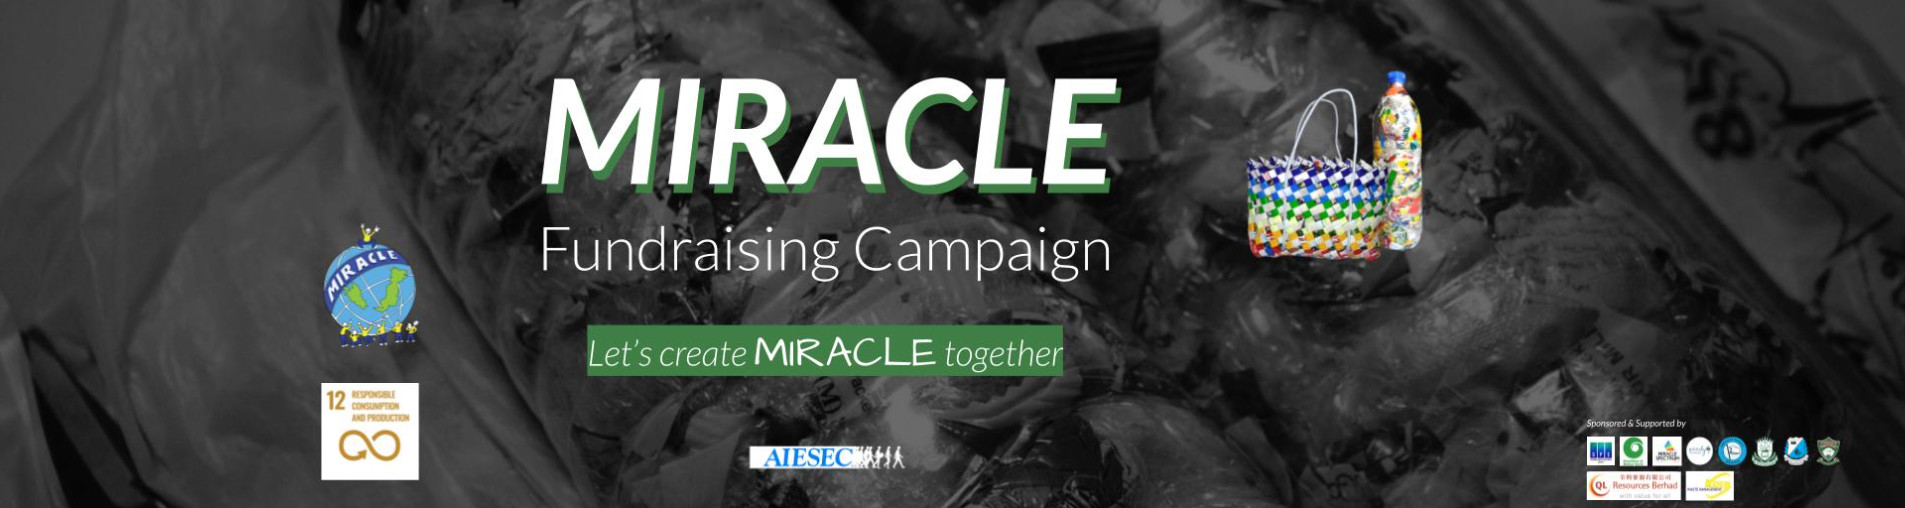 MIRACLE Fundraising Campaign